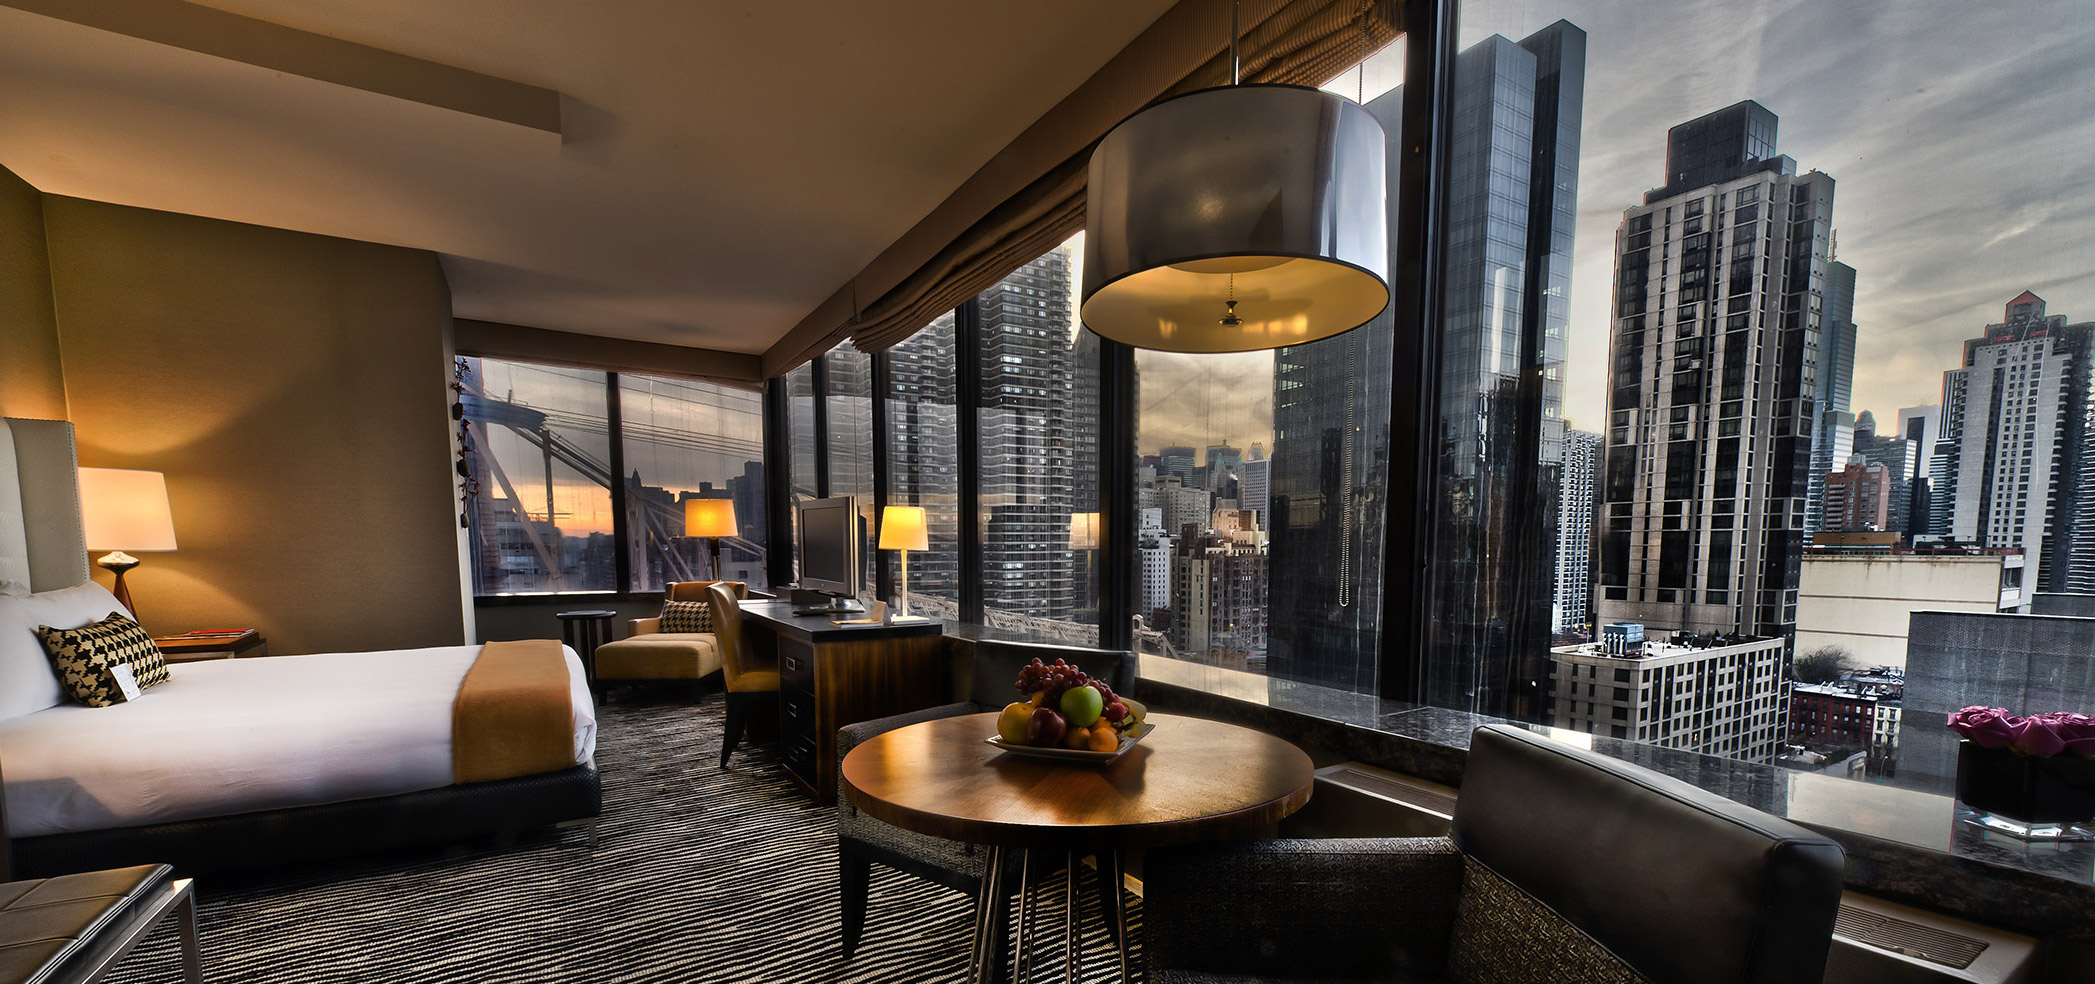 New York Hotels That Offer The Best View Of The City ...